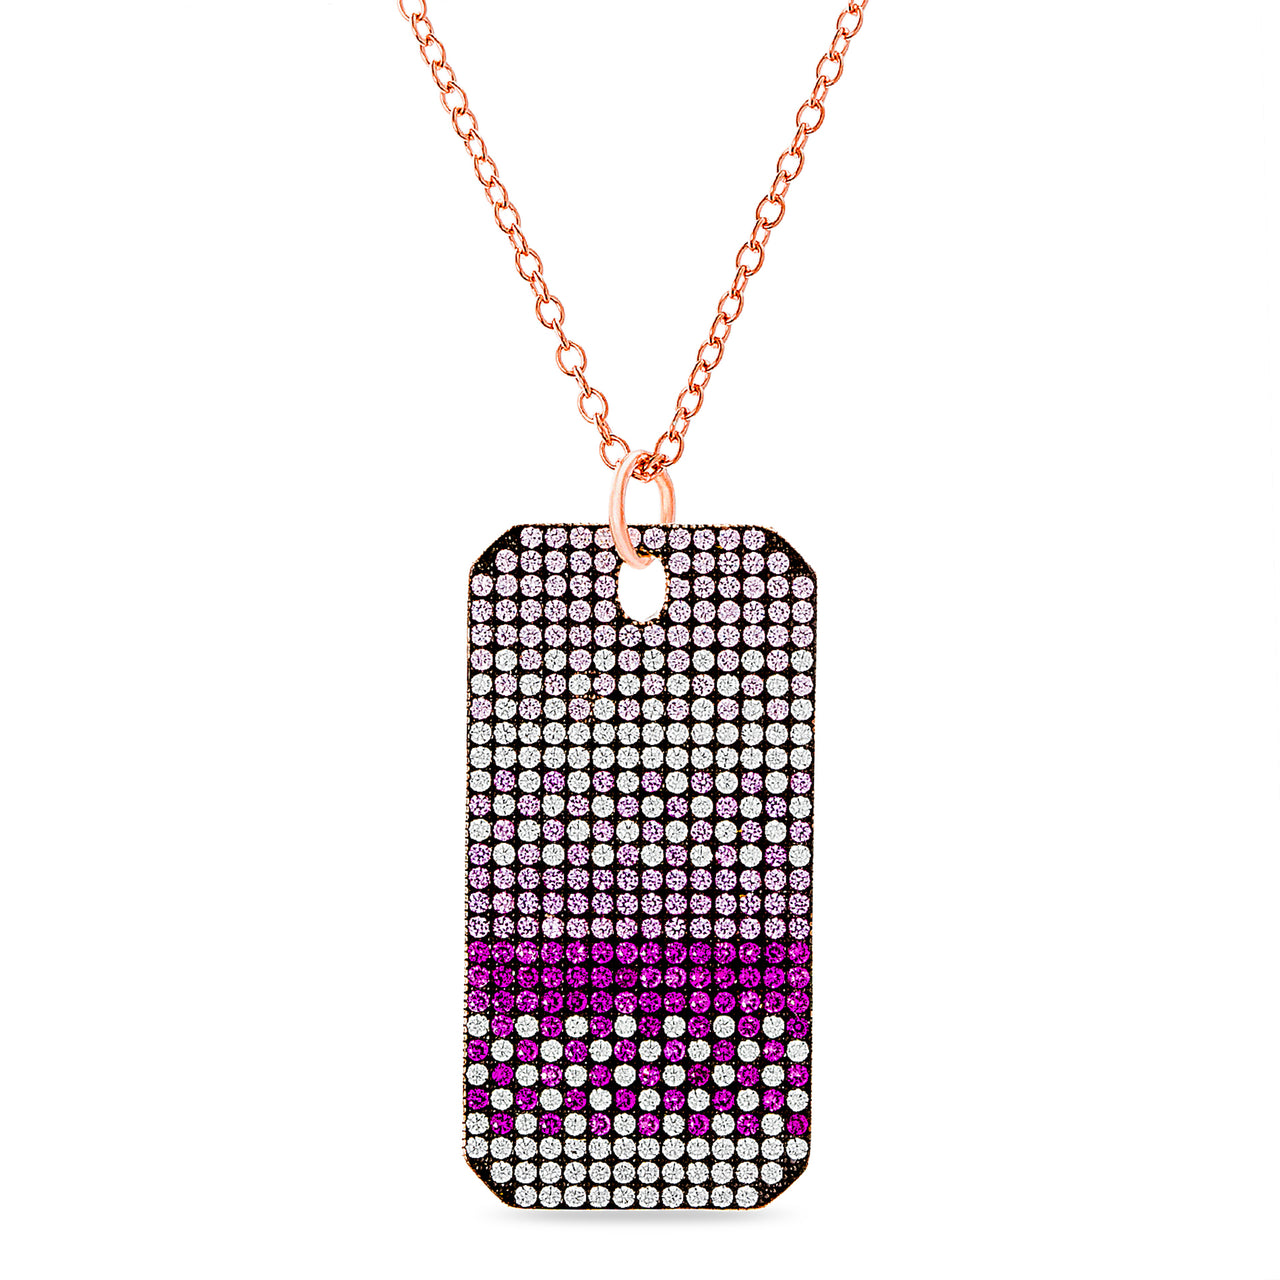 Lesa Michele Cubic Zirconia Dog Tag Necklace in Rhodium or 14K Rose Gold Plated Sterling Silver